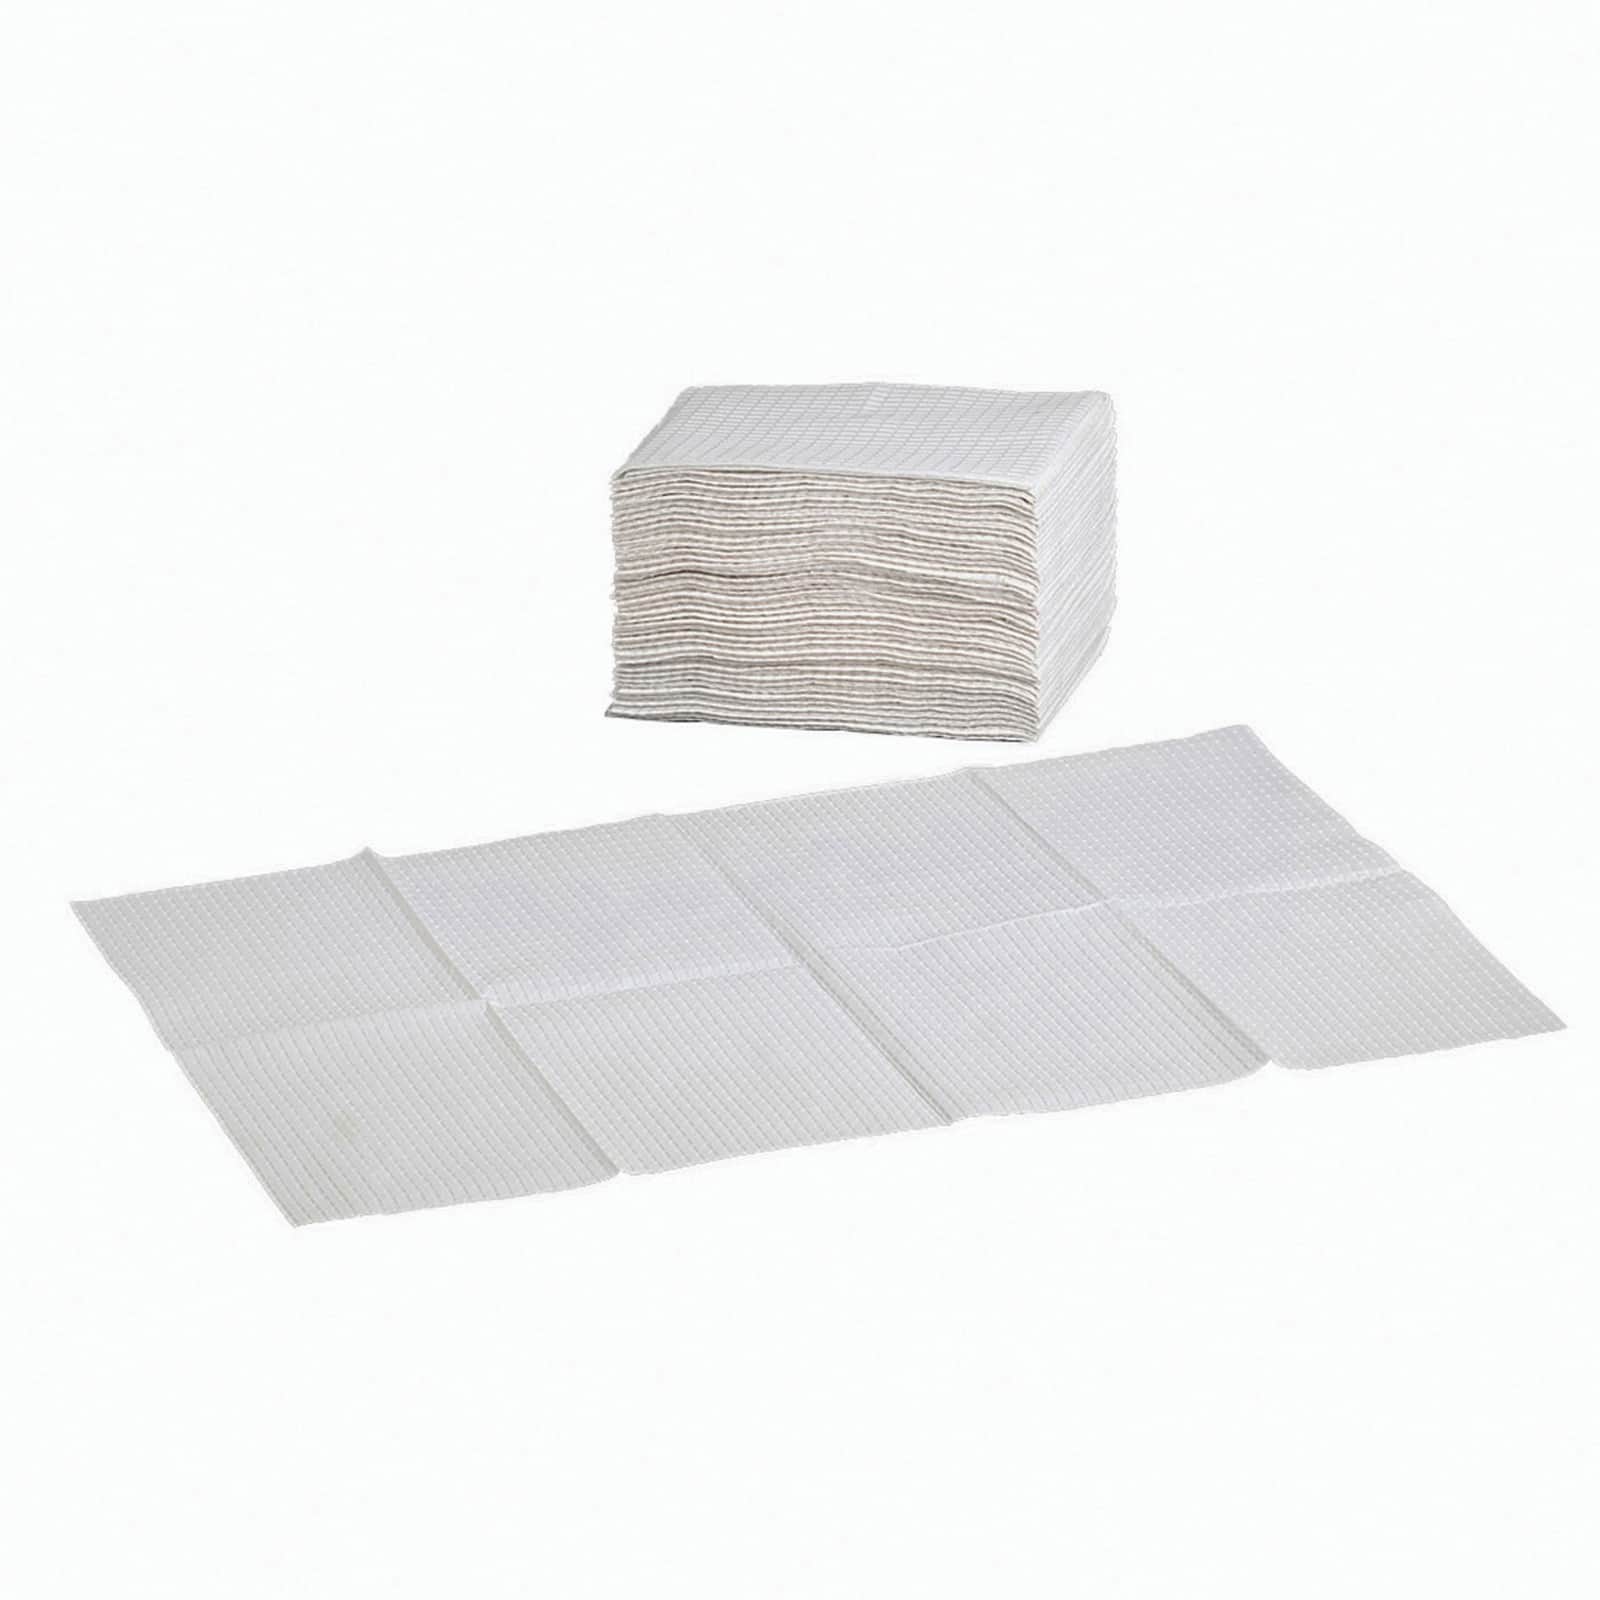 Foundations Changing Station Non-Waterproof Liners, 500ct.